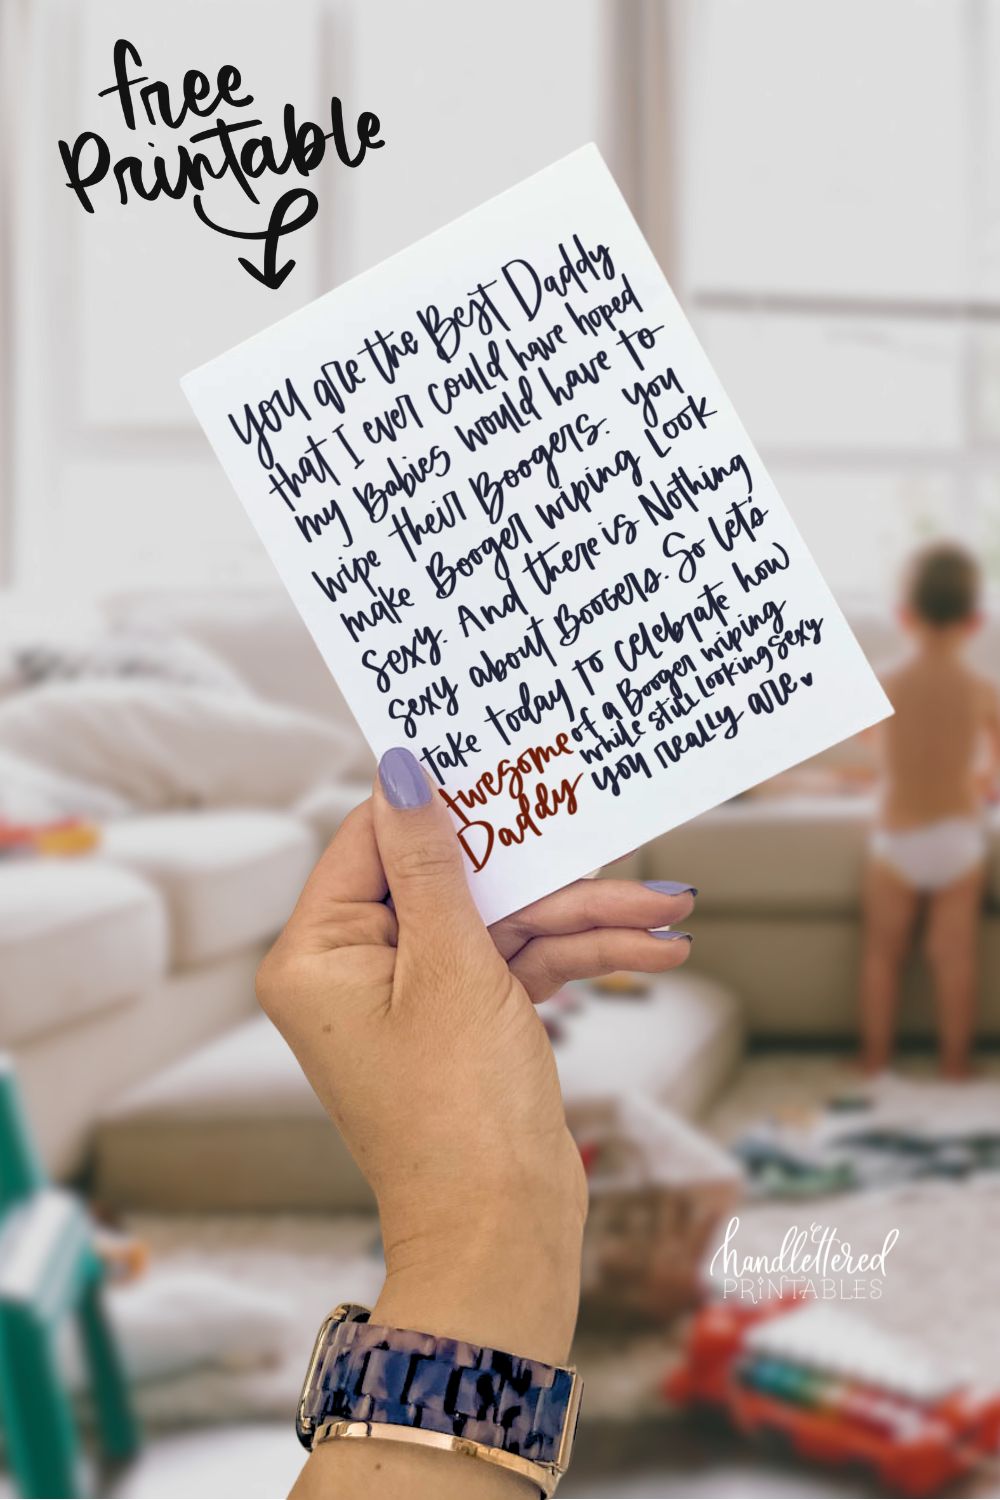 image of funny fathers day card: text over reads 'free printable' with an arrow woman's hand holding a card in a messy living room with baby in the background. card reads: you are the best daddy that I could ever have hoped my babies would have to wipe their boogers. You make booger wiping look sexy. And there is nothing sexy about boogers. So let's take today to celebrate how awesome of a booger wiping while still looking sexy you really are.